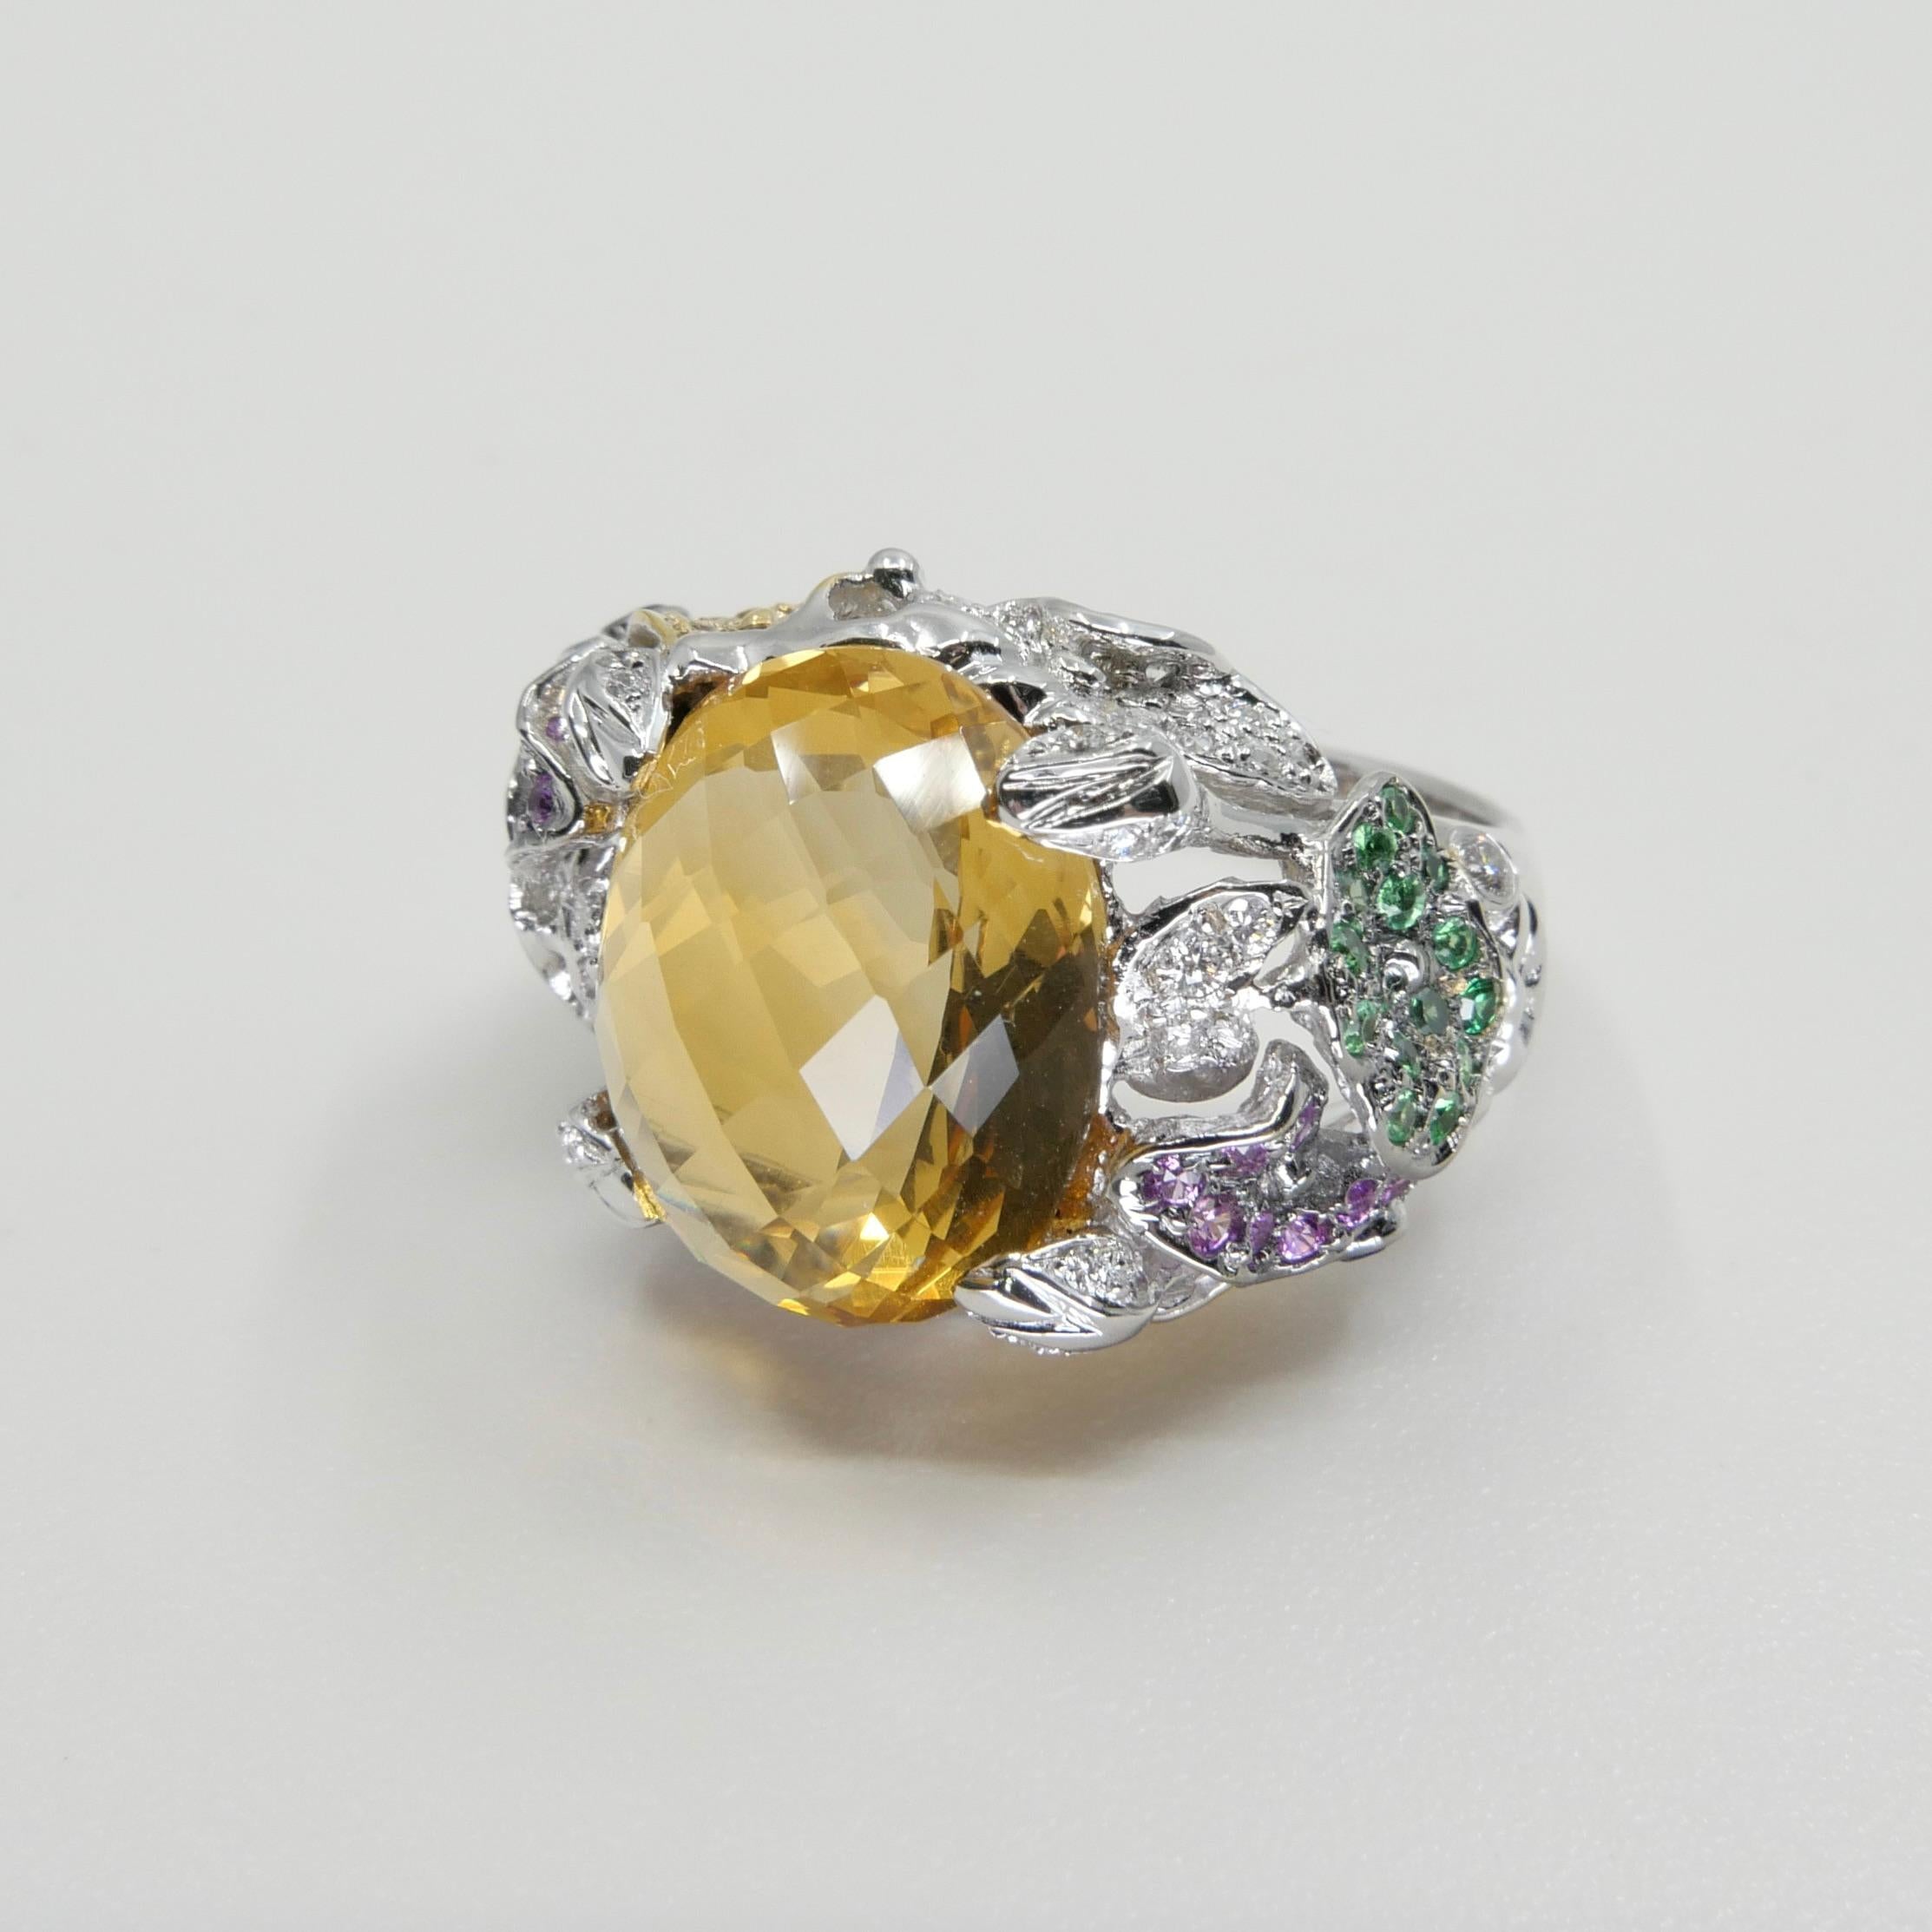 Checker Cut Yellow Topaz, Diamond & Colored Gemstones Cocktail Ring, Colorful For Sale 3